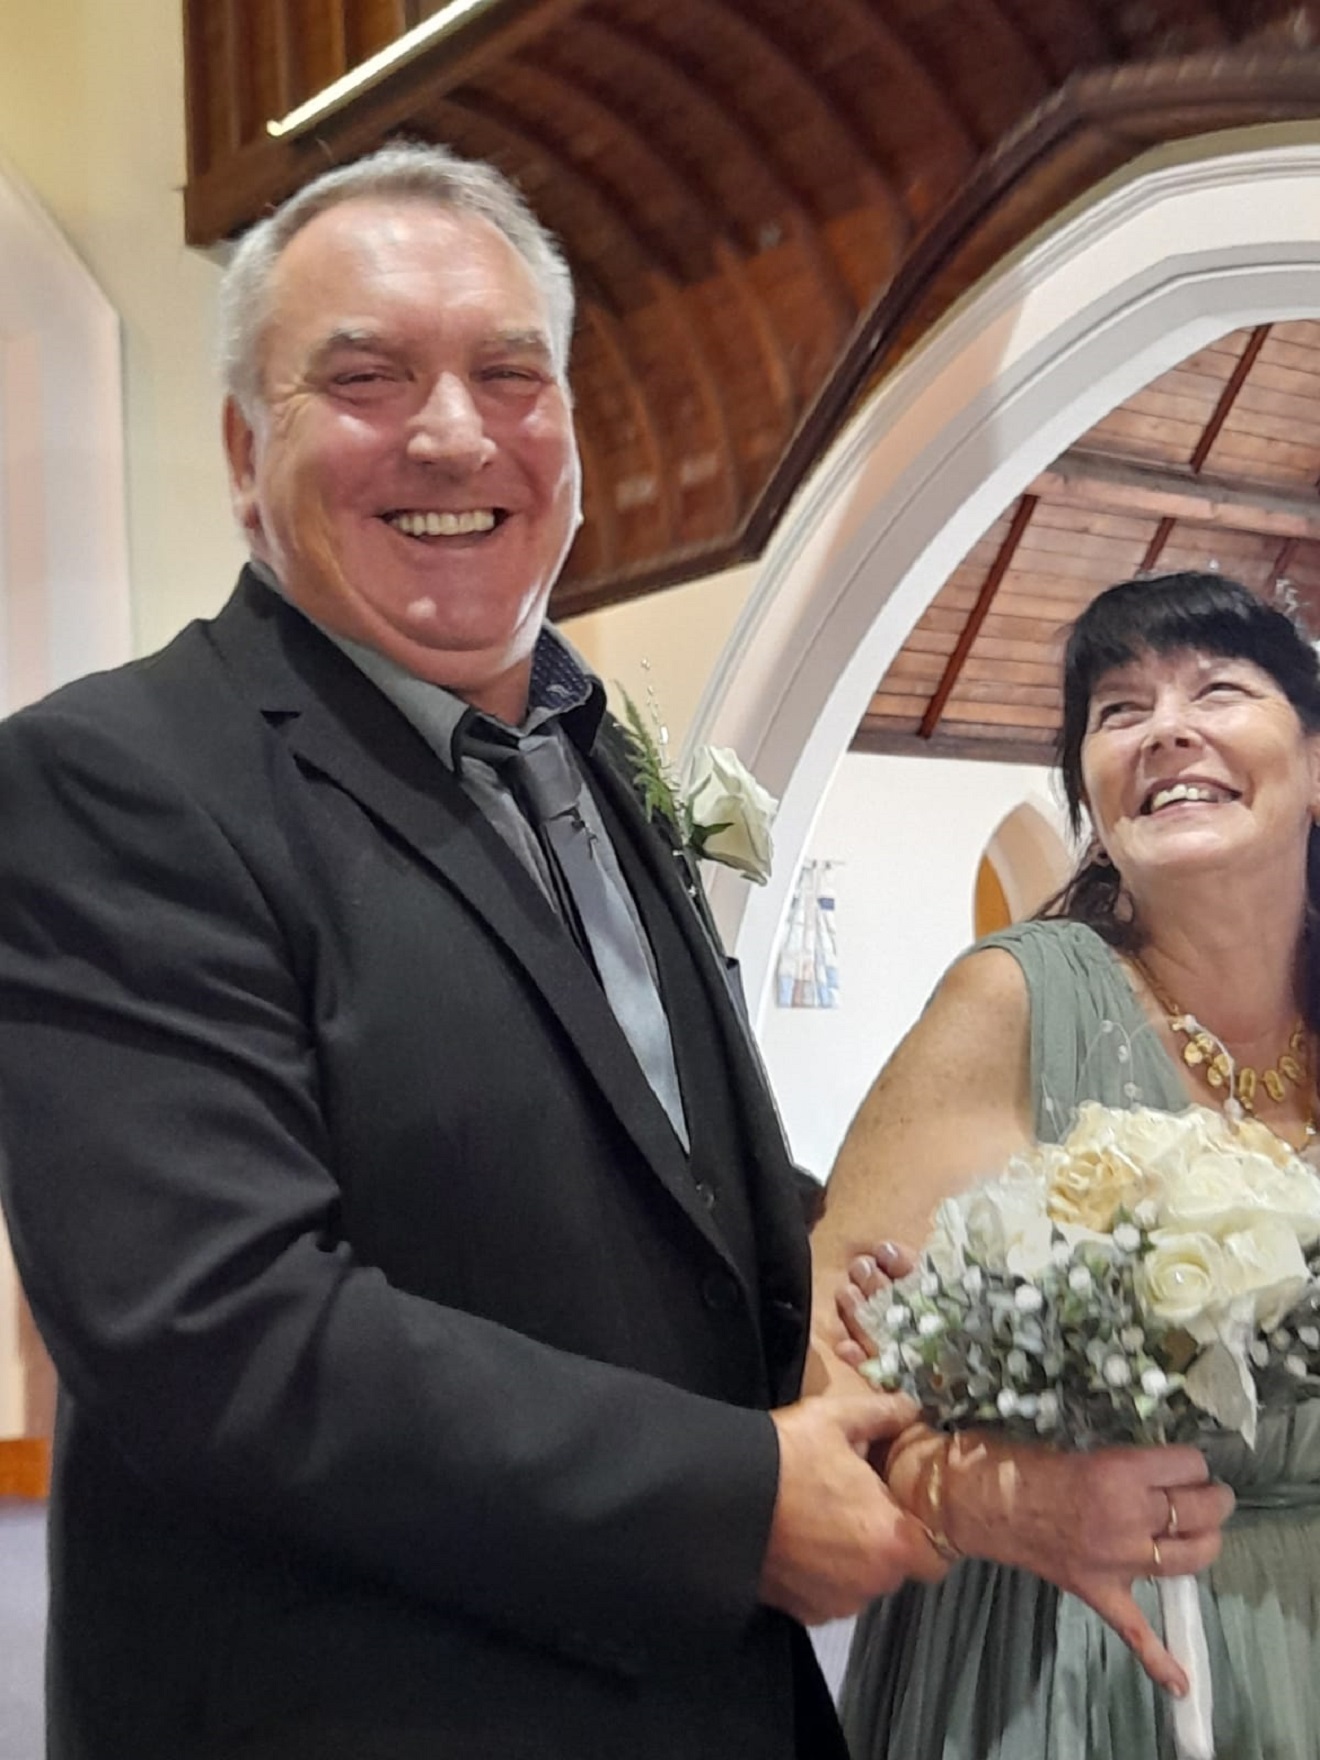 RENEWAL: Martin and Sheila at their vow renewal